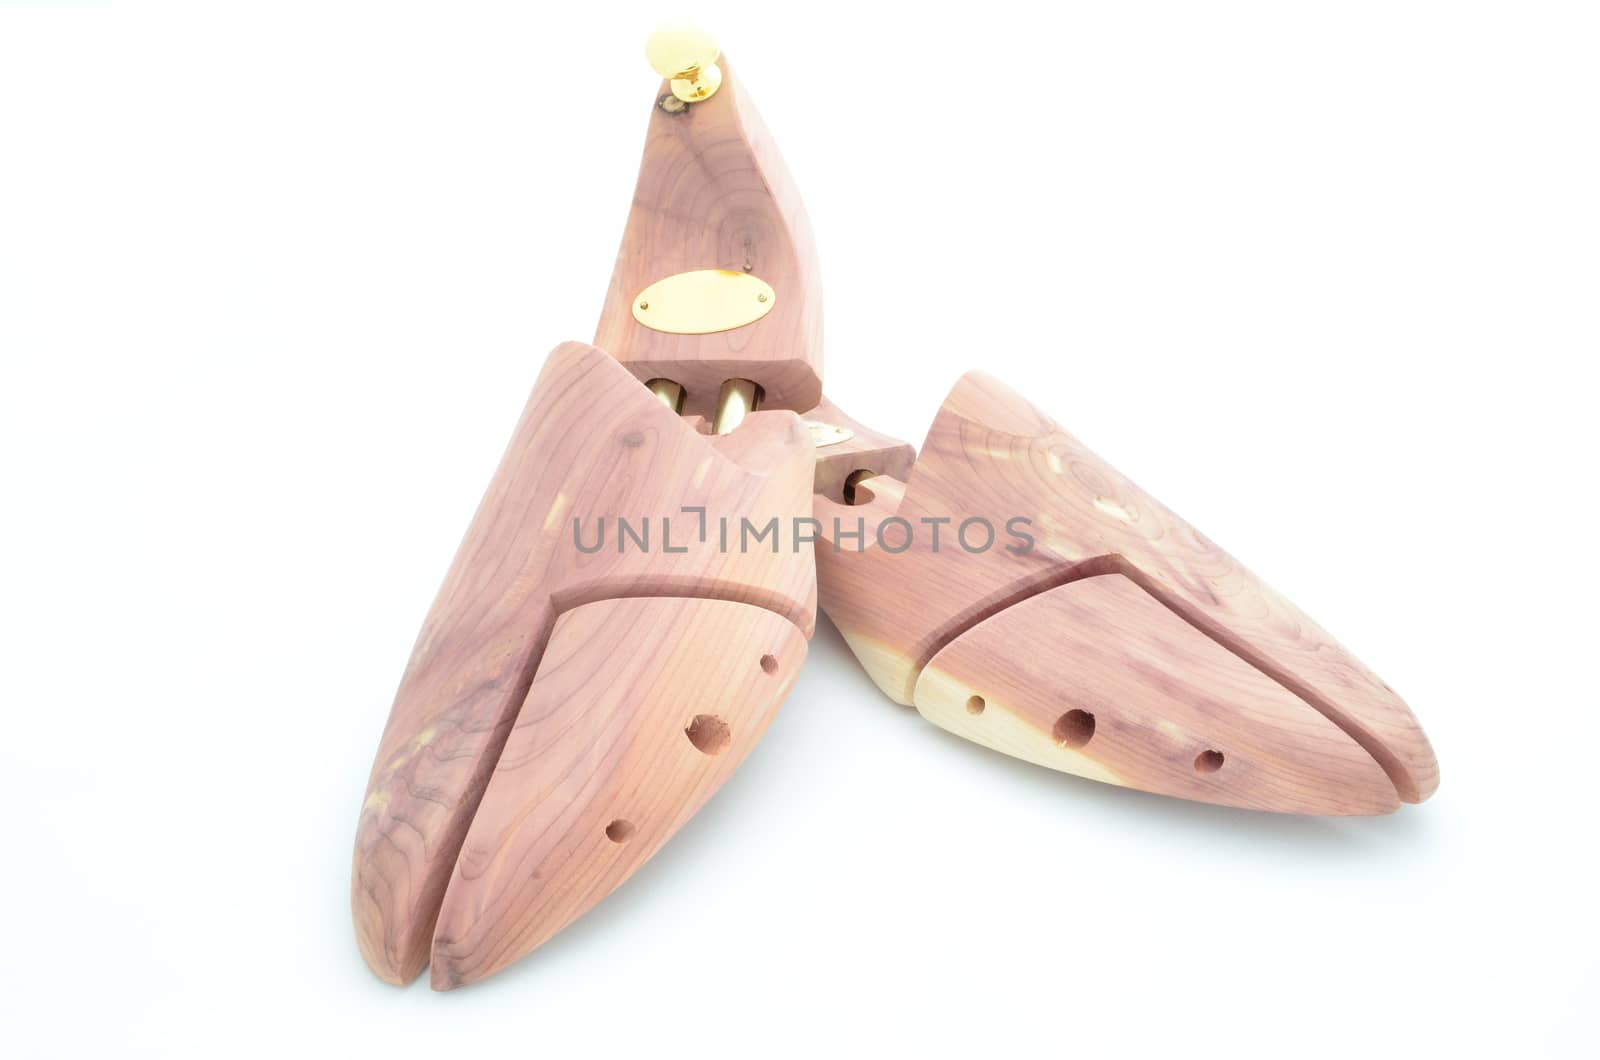 Pair of wooden shoe trees by pljvv